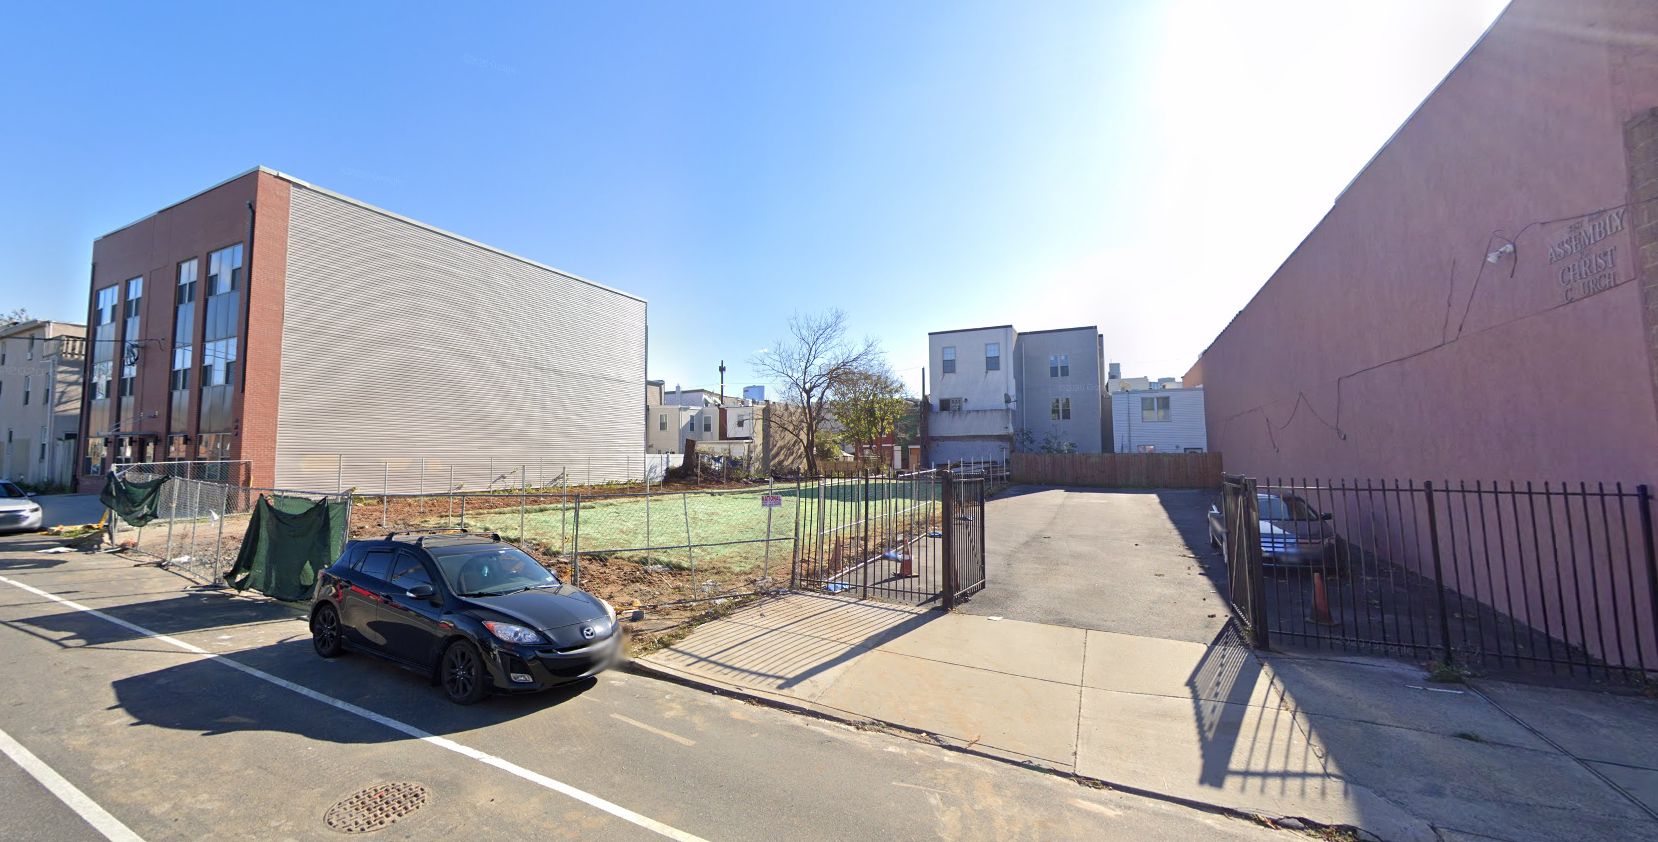 3616 Haverford Avenue. Looking southeast. Credit: Google Maps